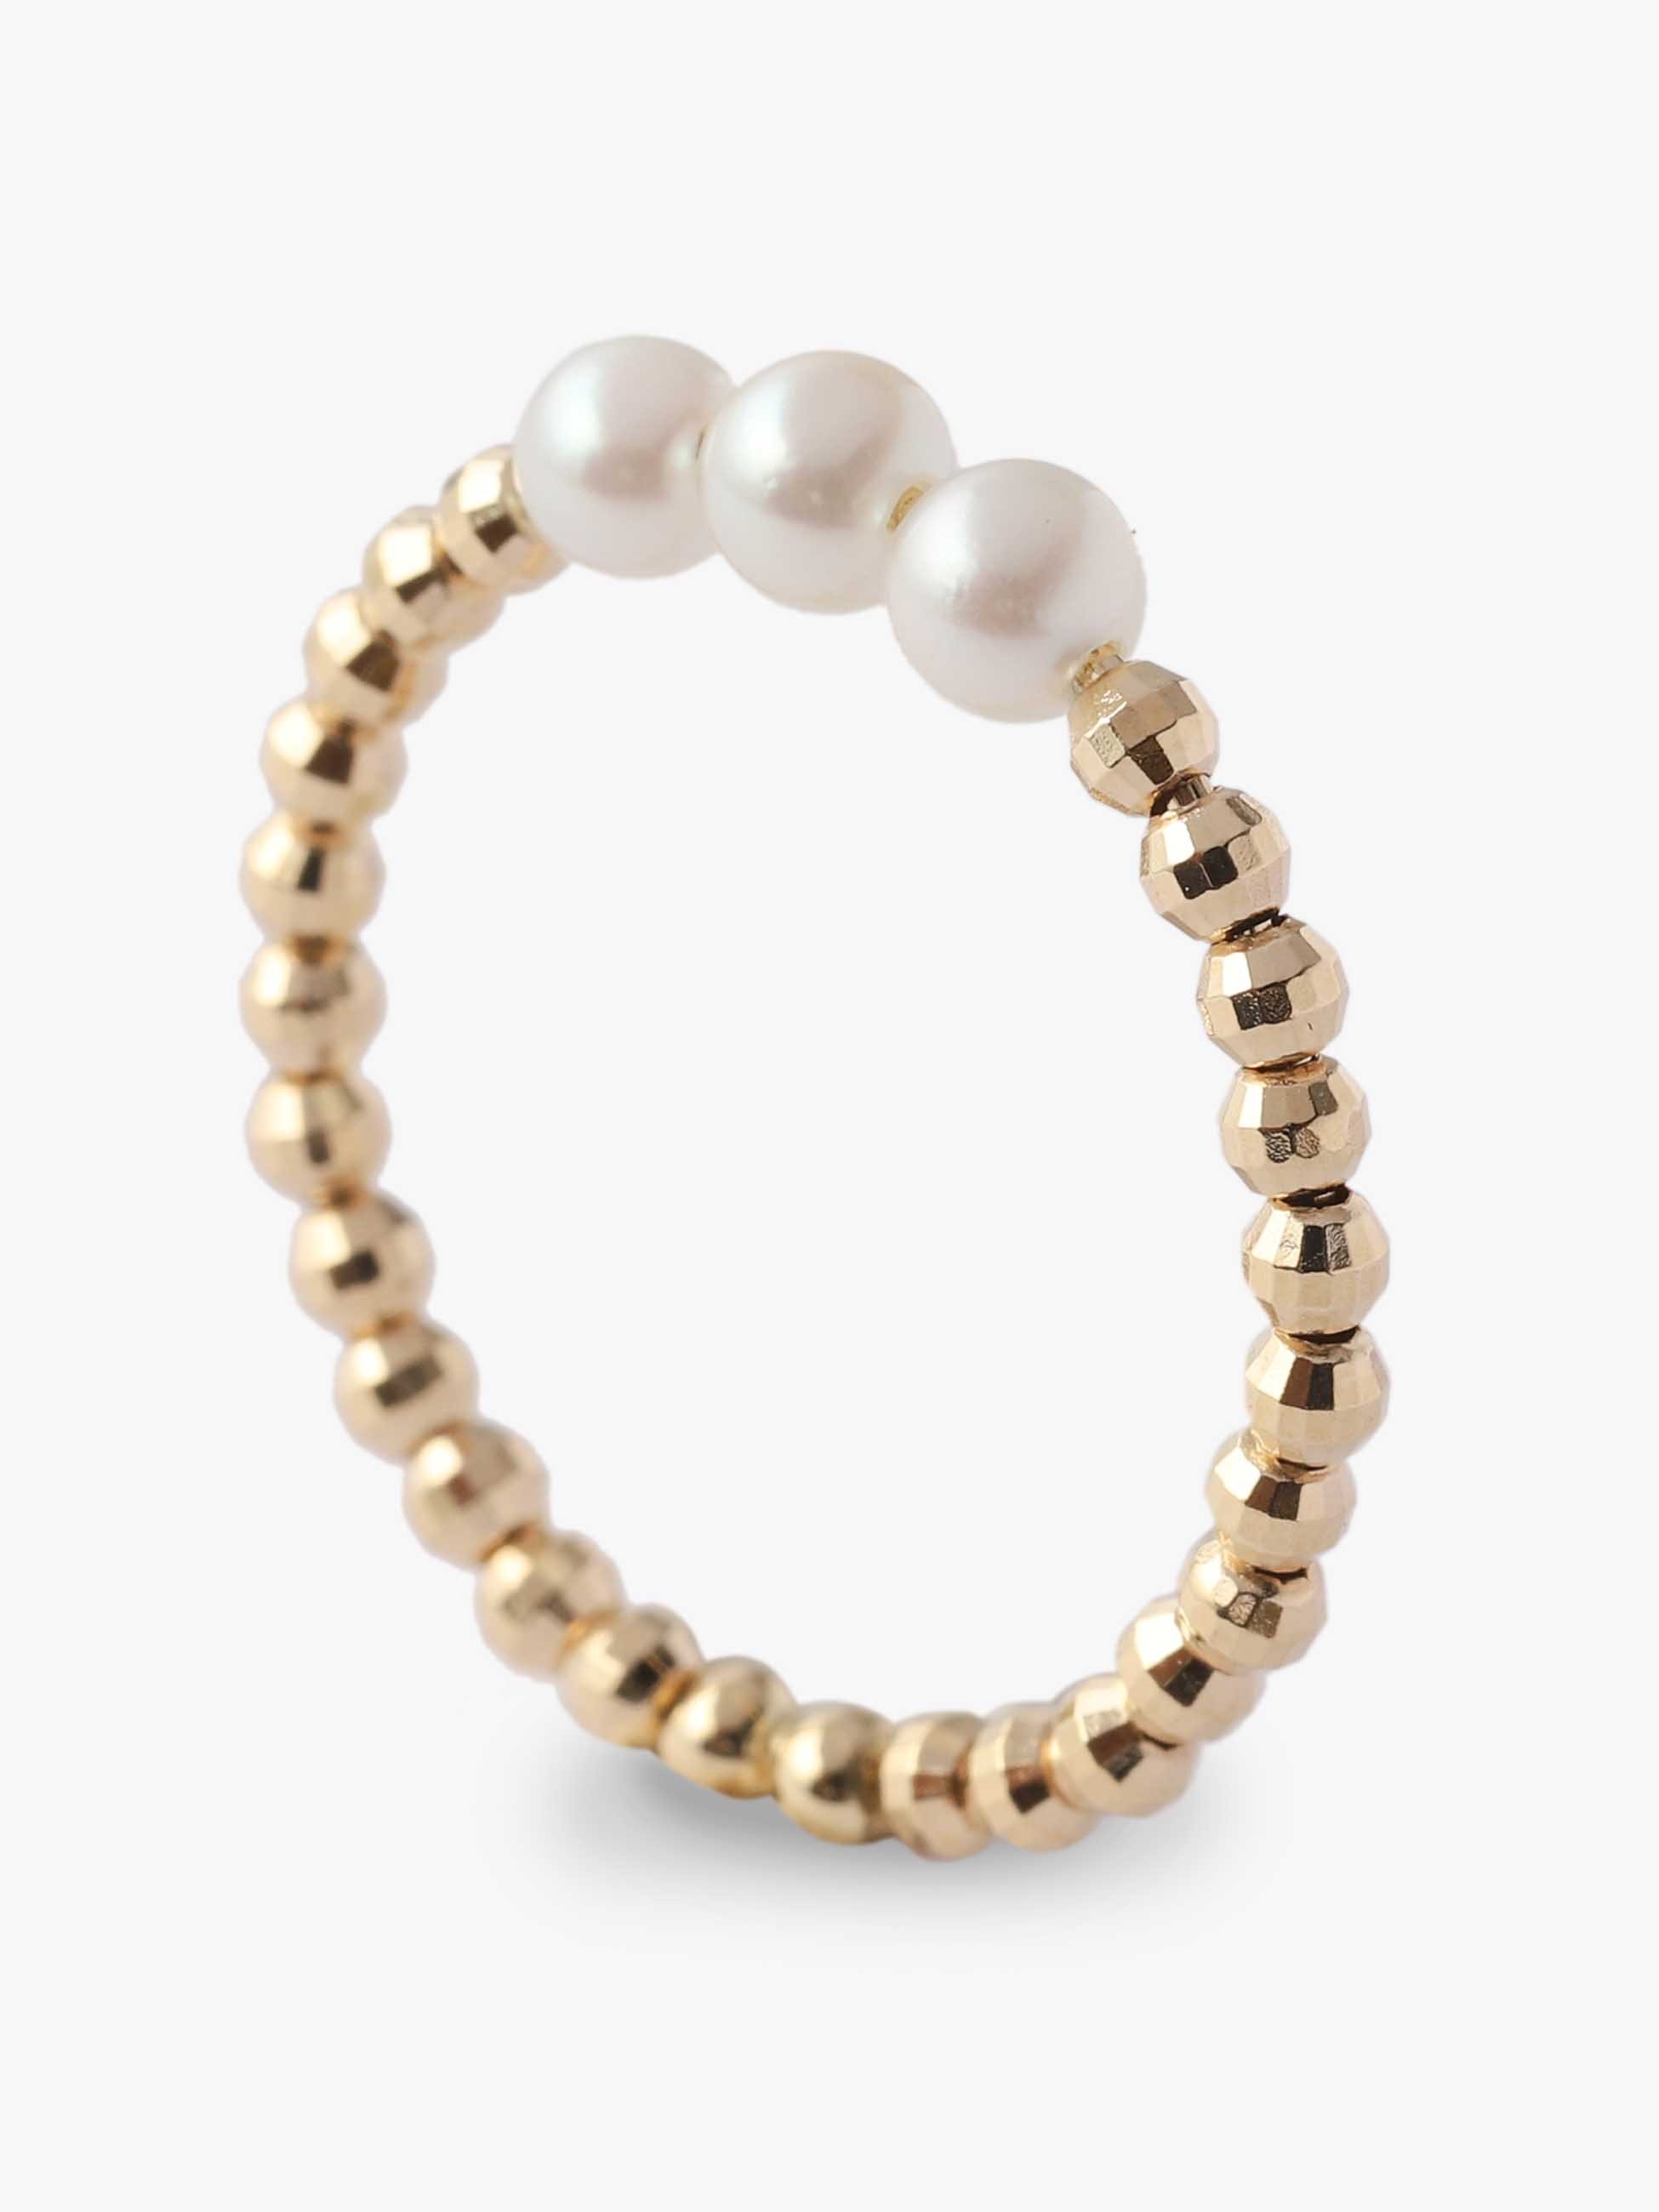 14kt Yellow Gold Cut Beads and 3 Pearl Ring